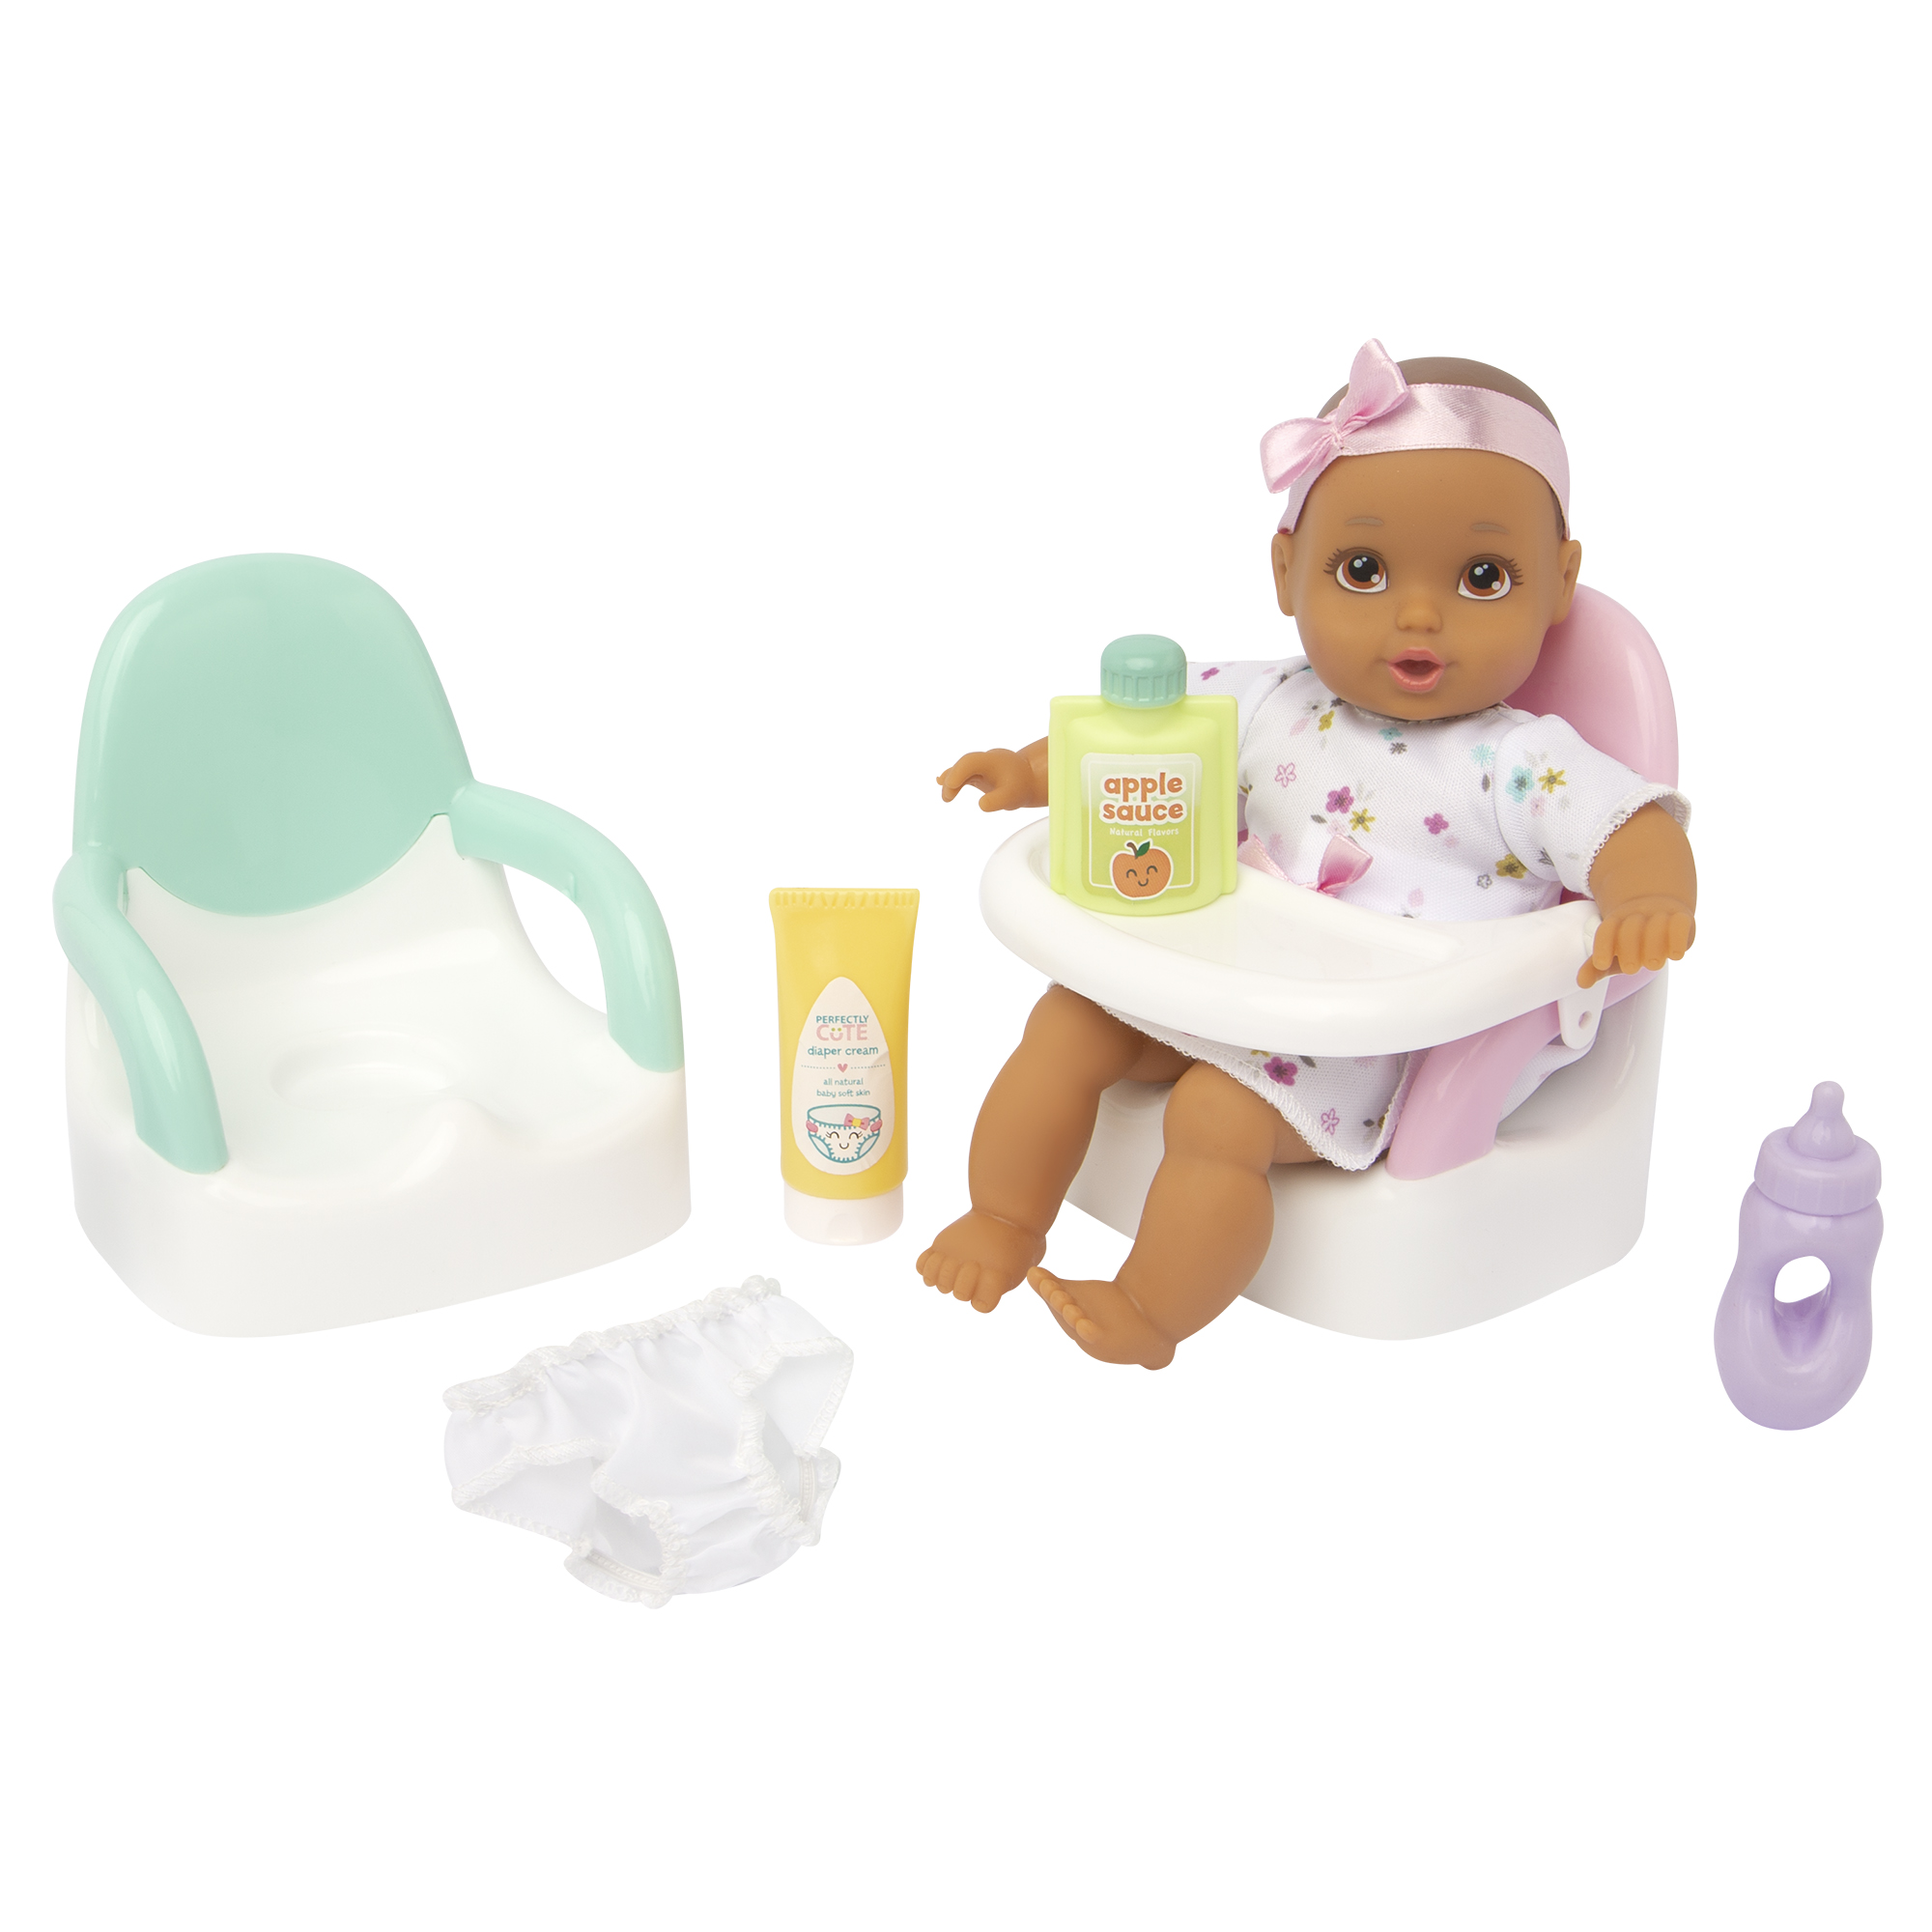 My Lil’ Baby Playsets 8” Dolls Feed & Go Playset Girl Doll Brunette w/ Brown Eyes 9-Pieces